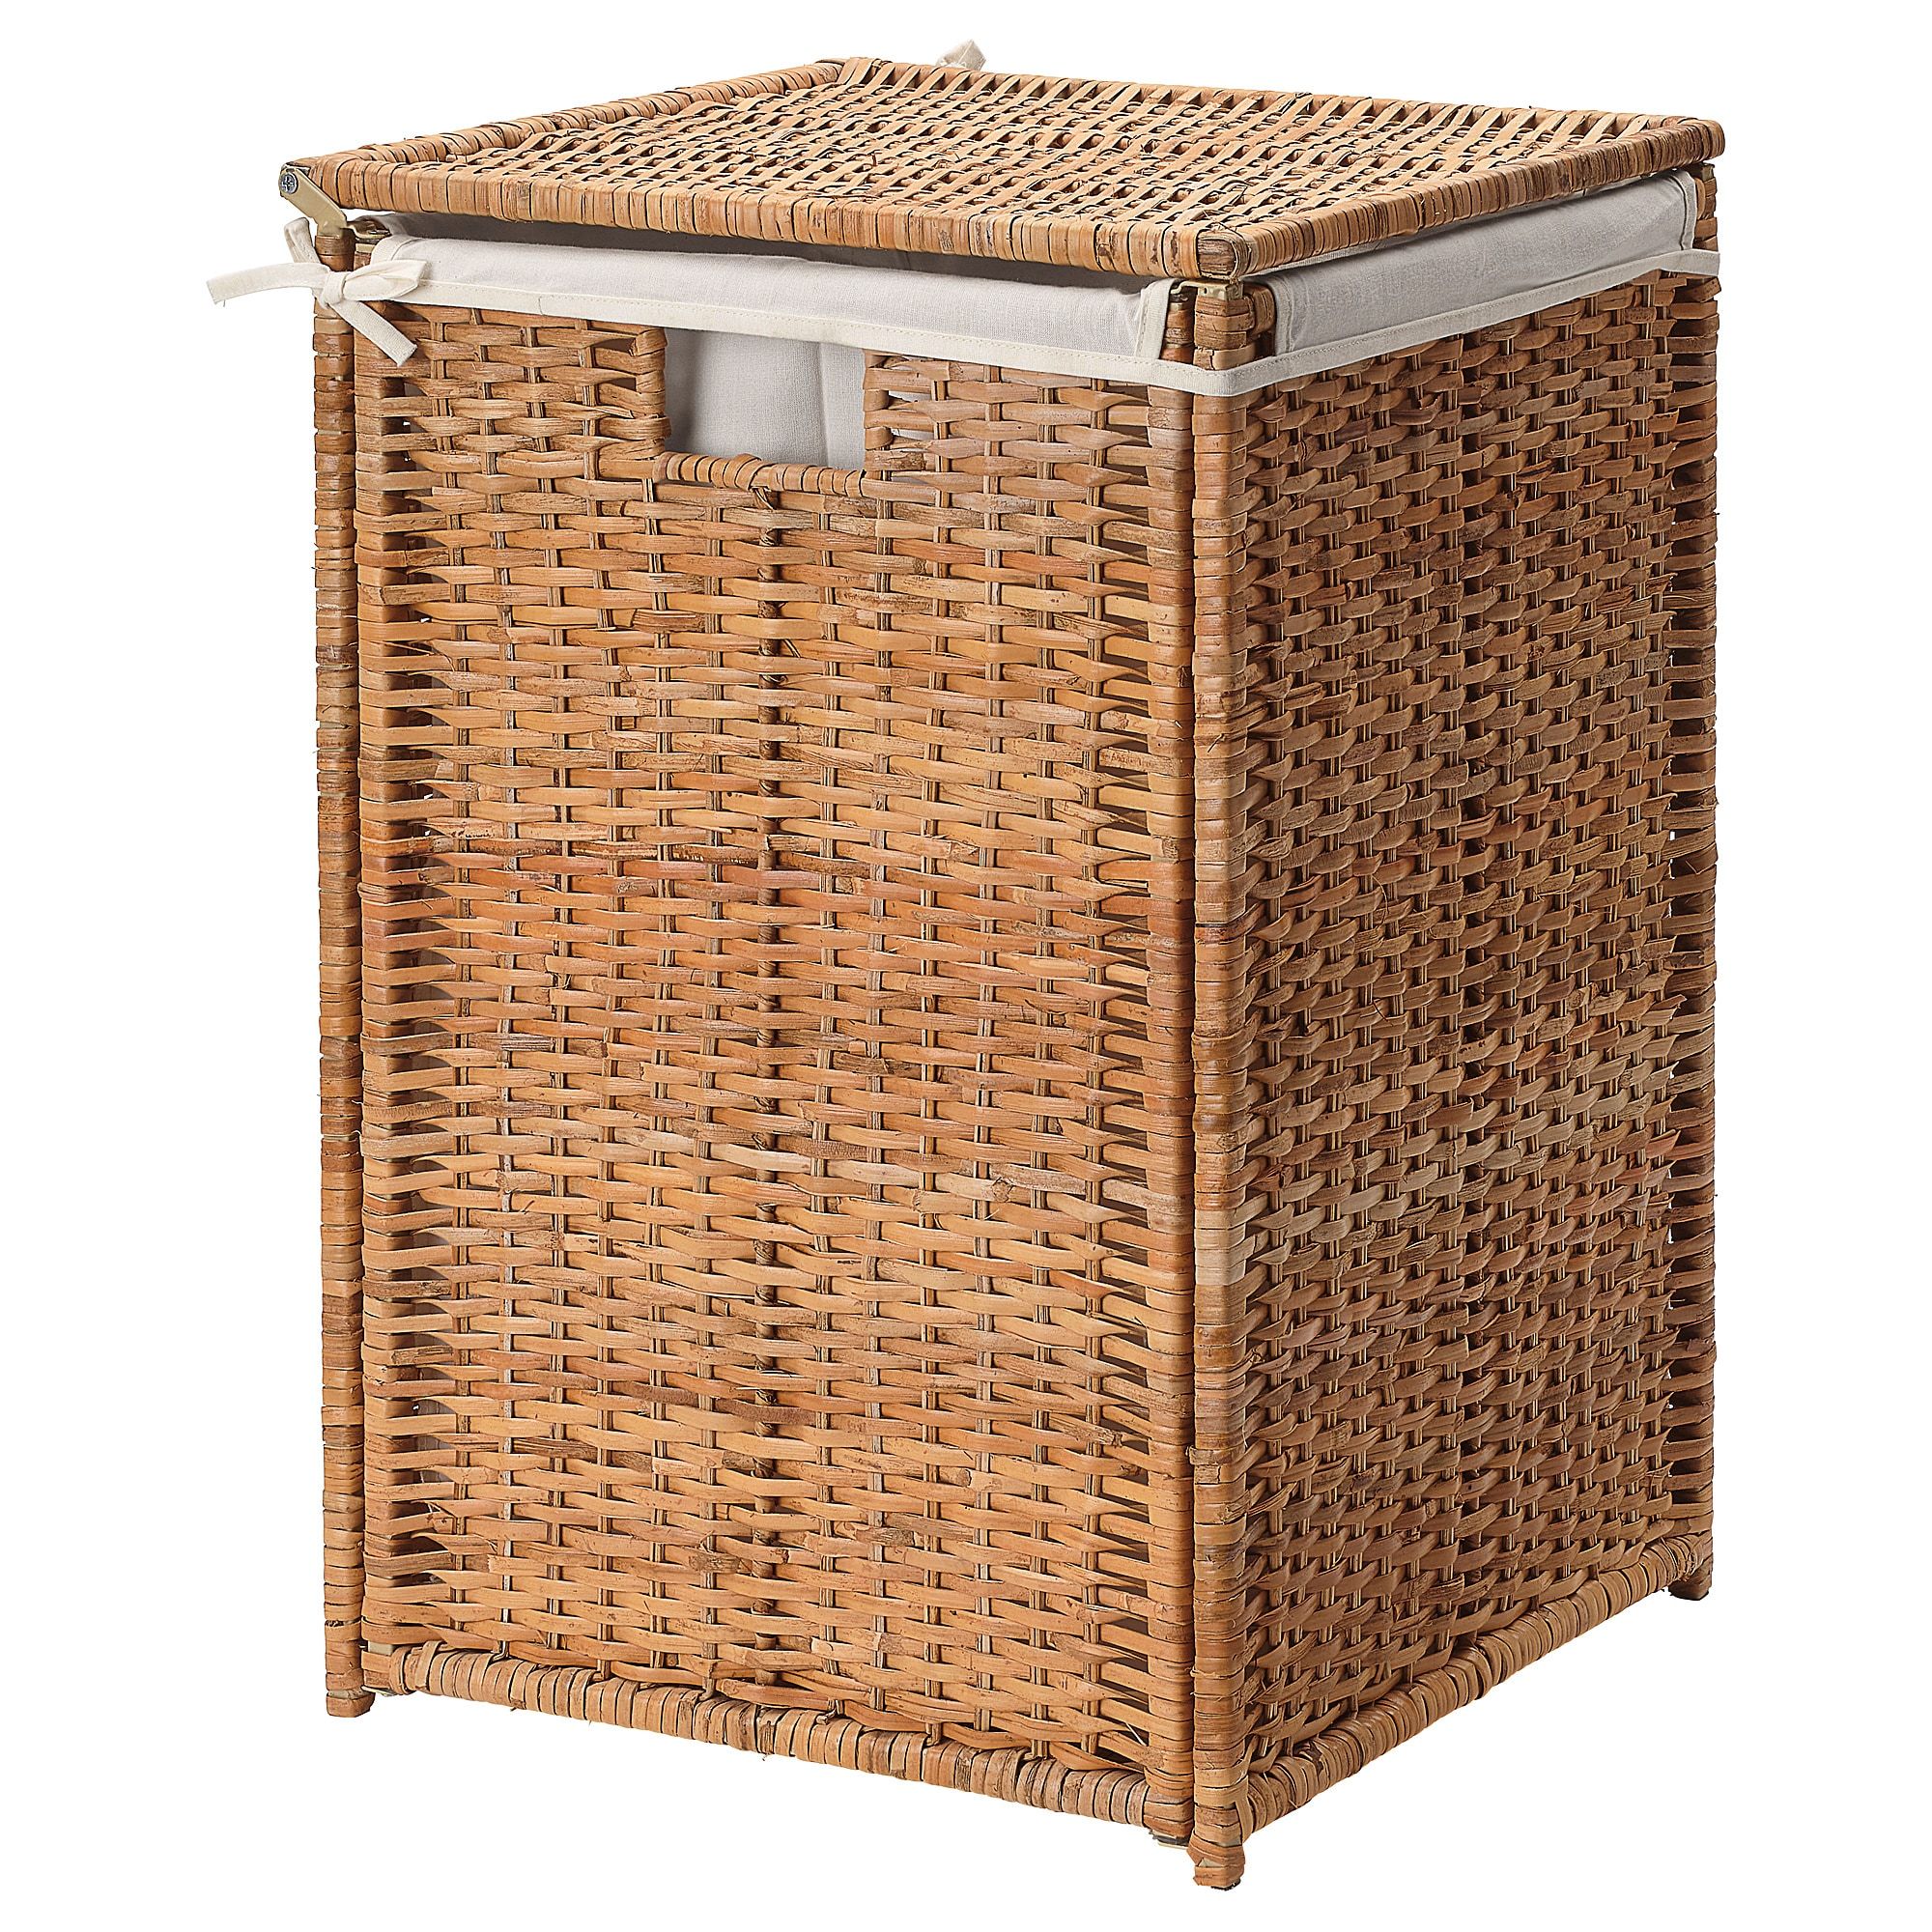 LIGHT WEIGHTED WICKERY LAUNDRY BASKET